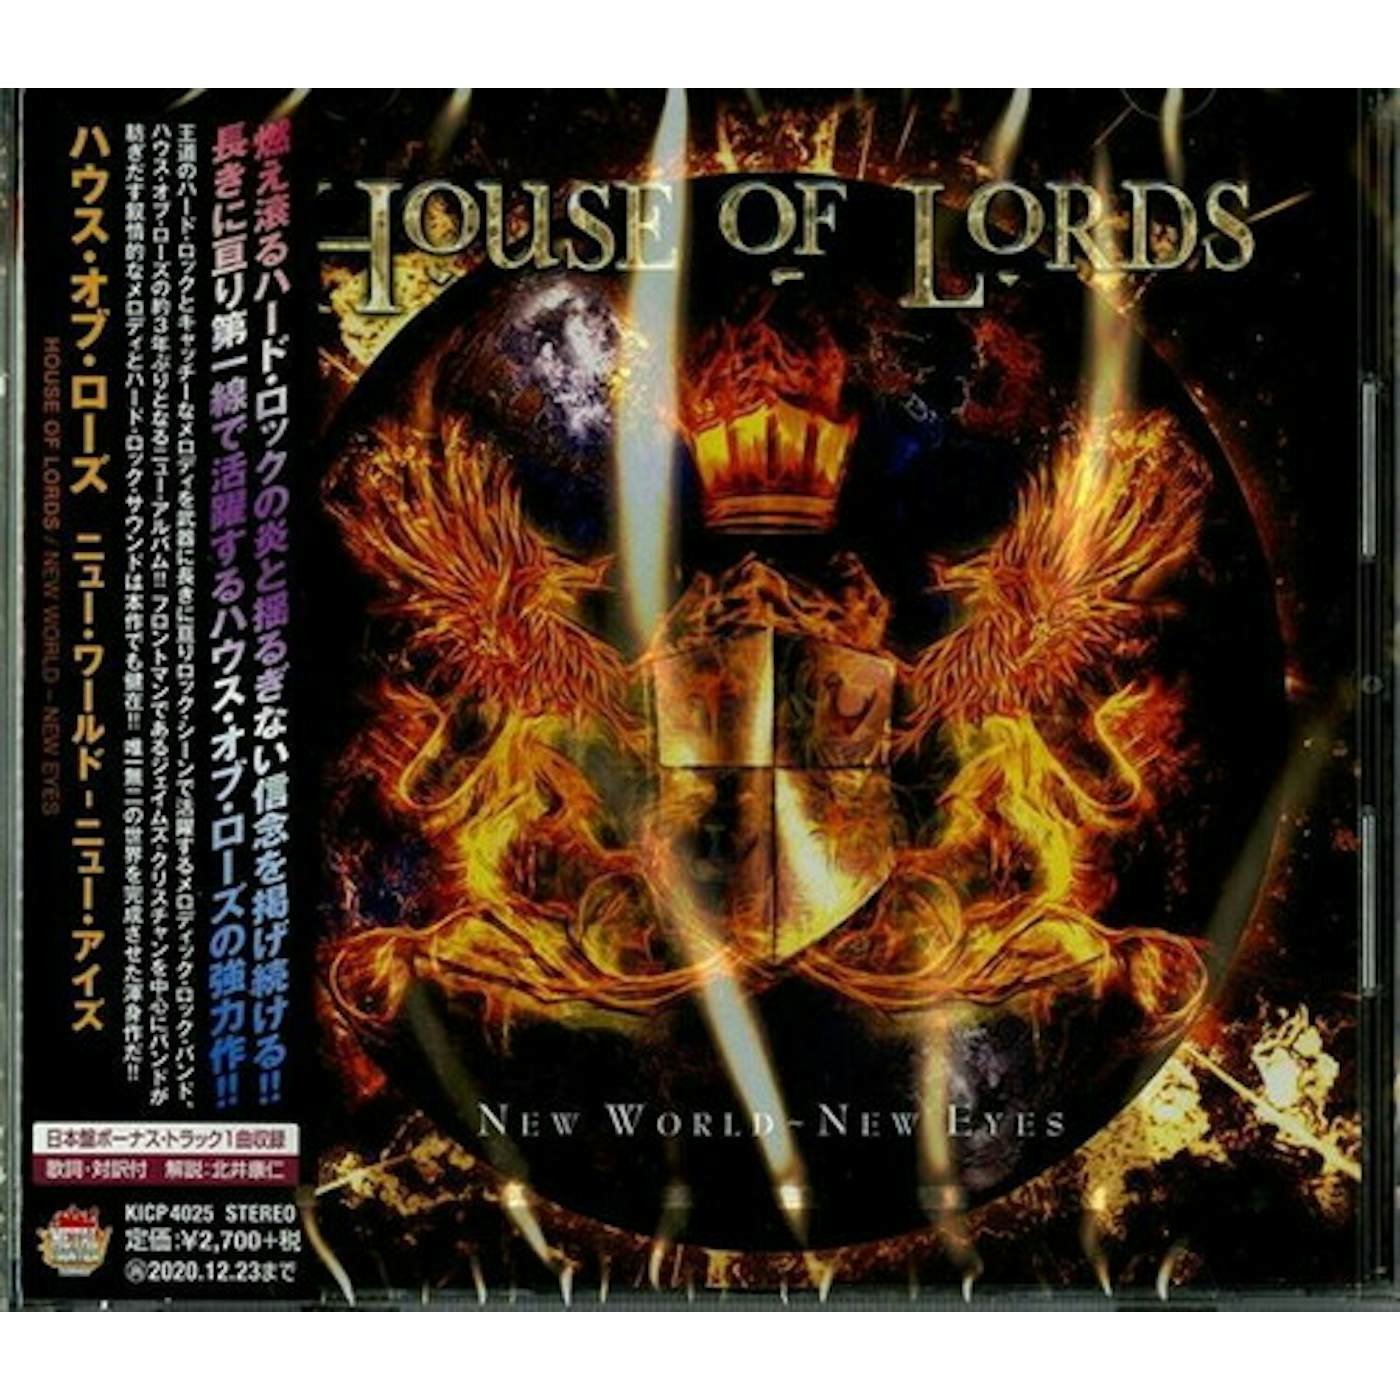 House Of Lords NEW WORLD - NEW EYES CD